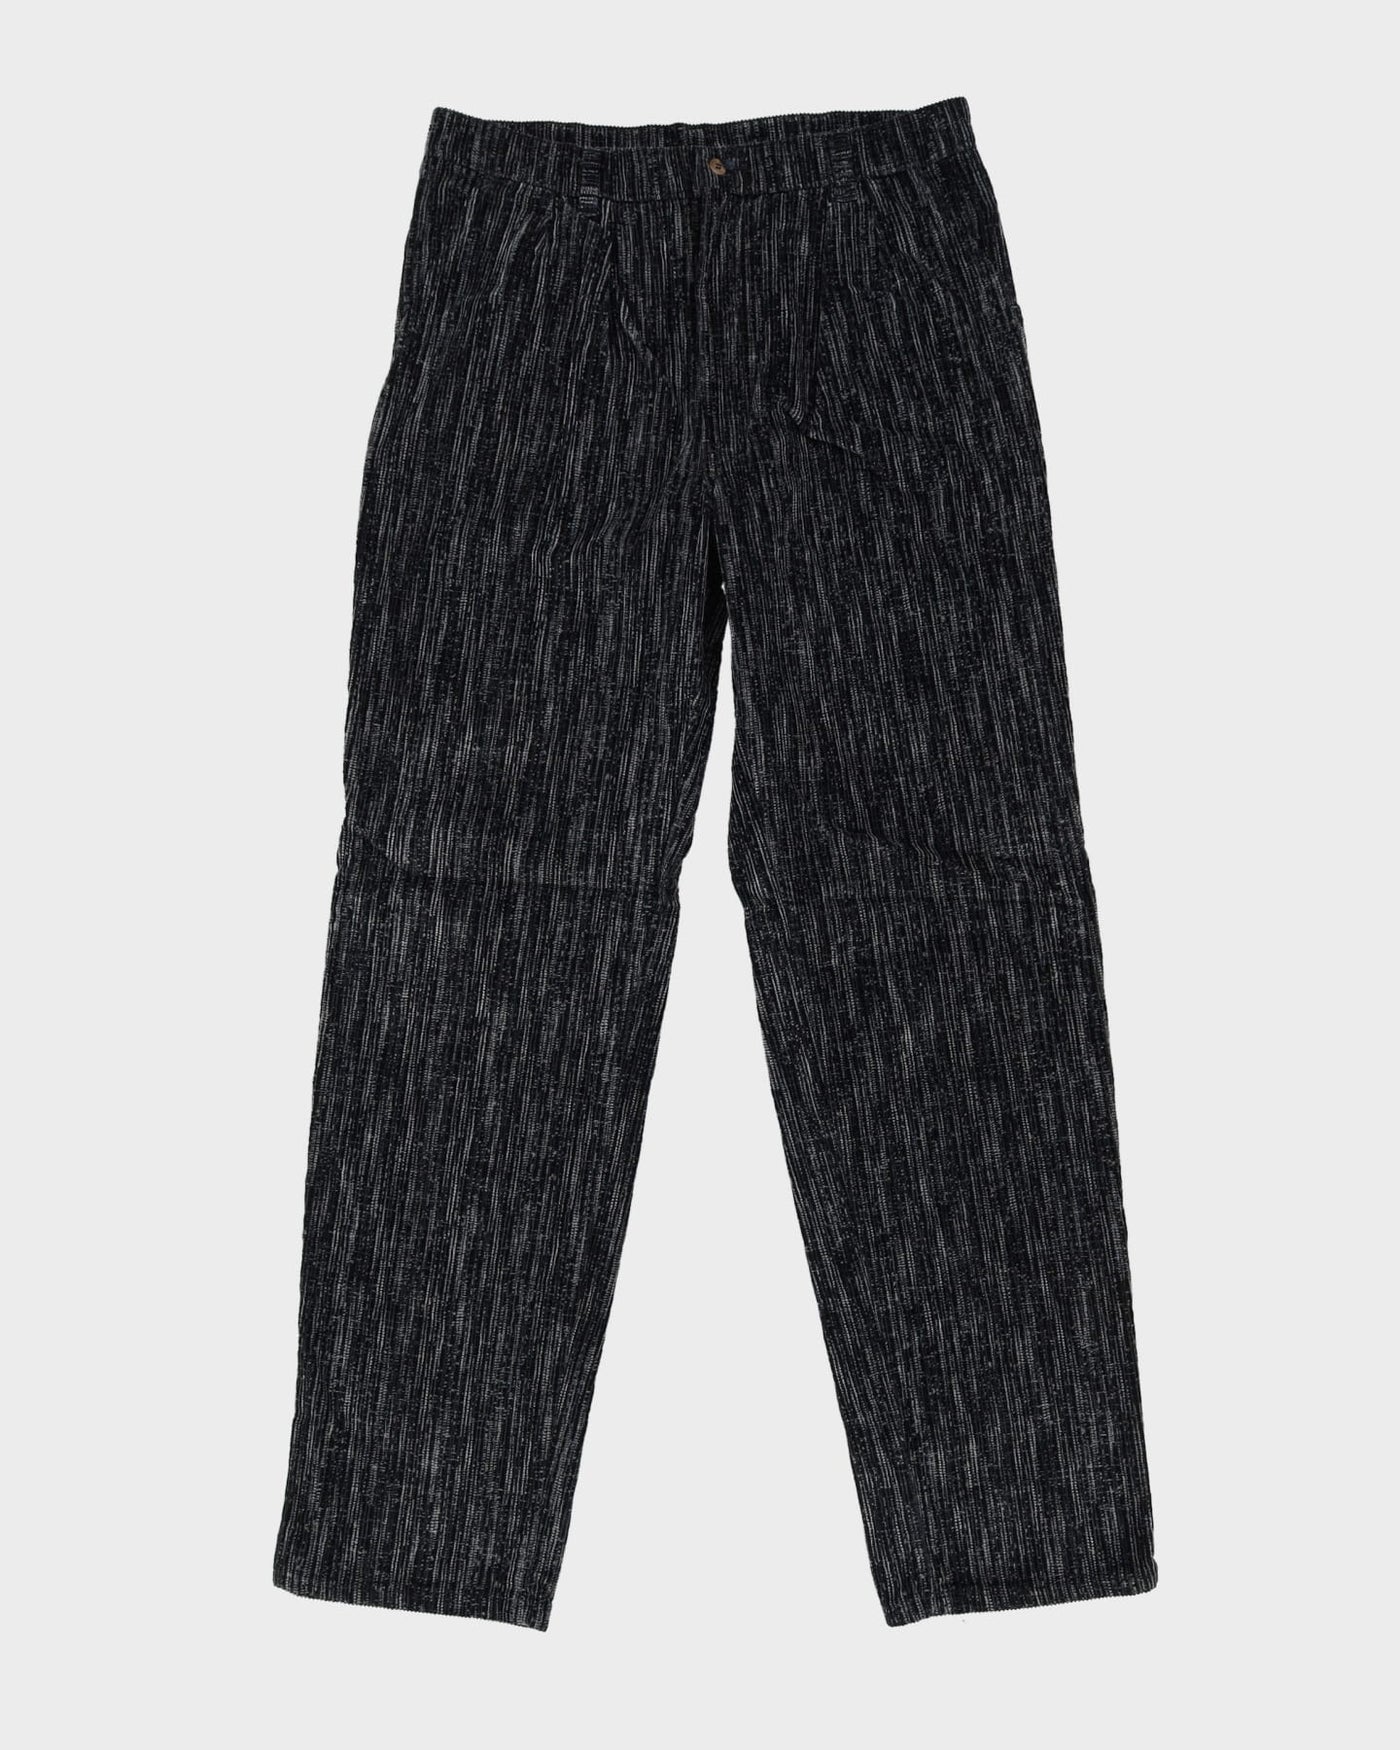 Vintage 90s Black / Grey Patterned Cord Trousers - W34 L32